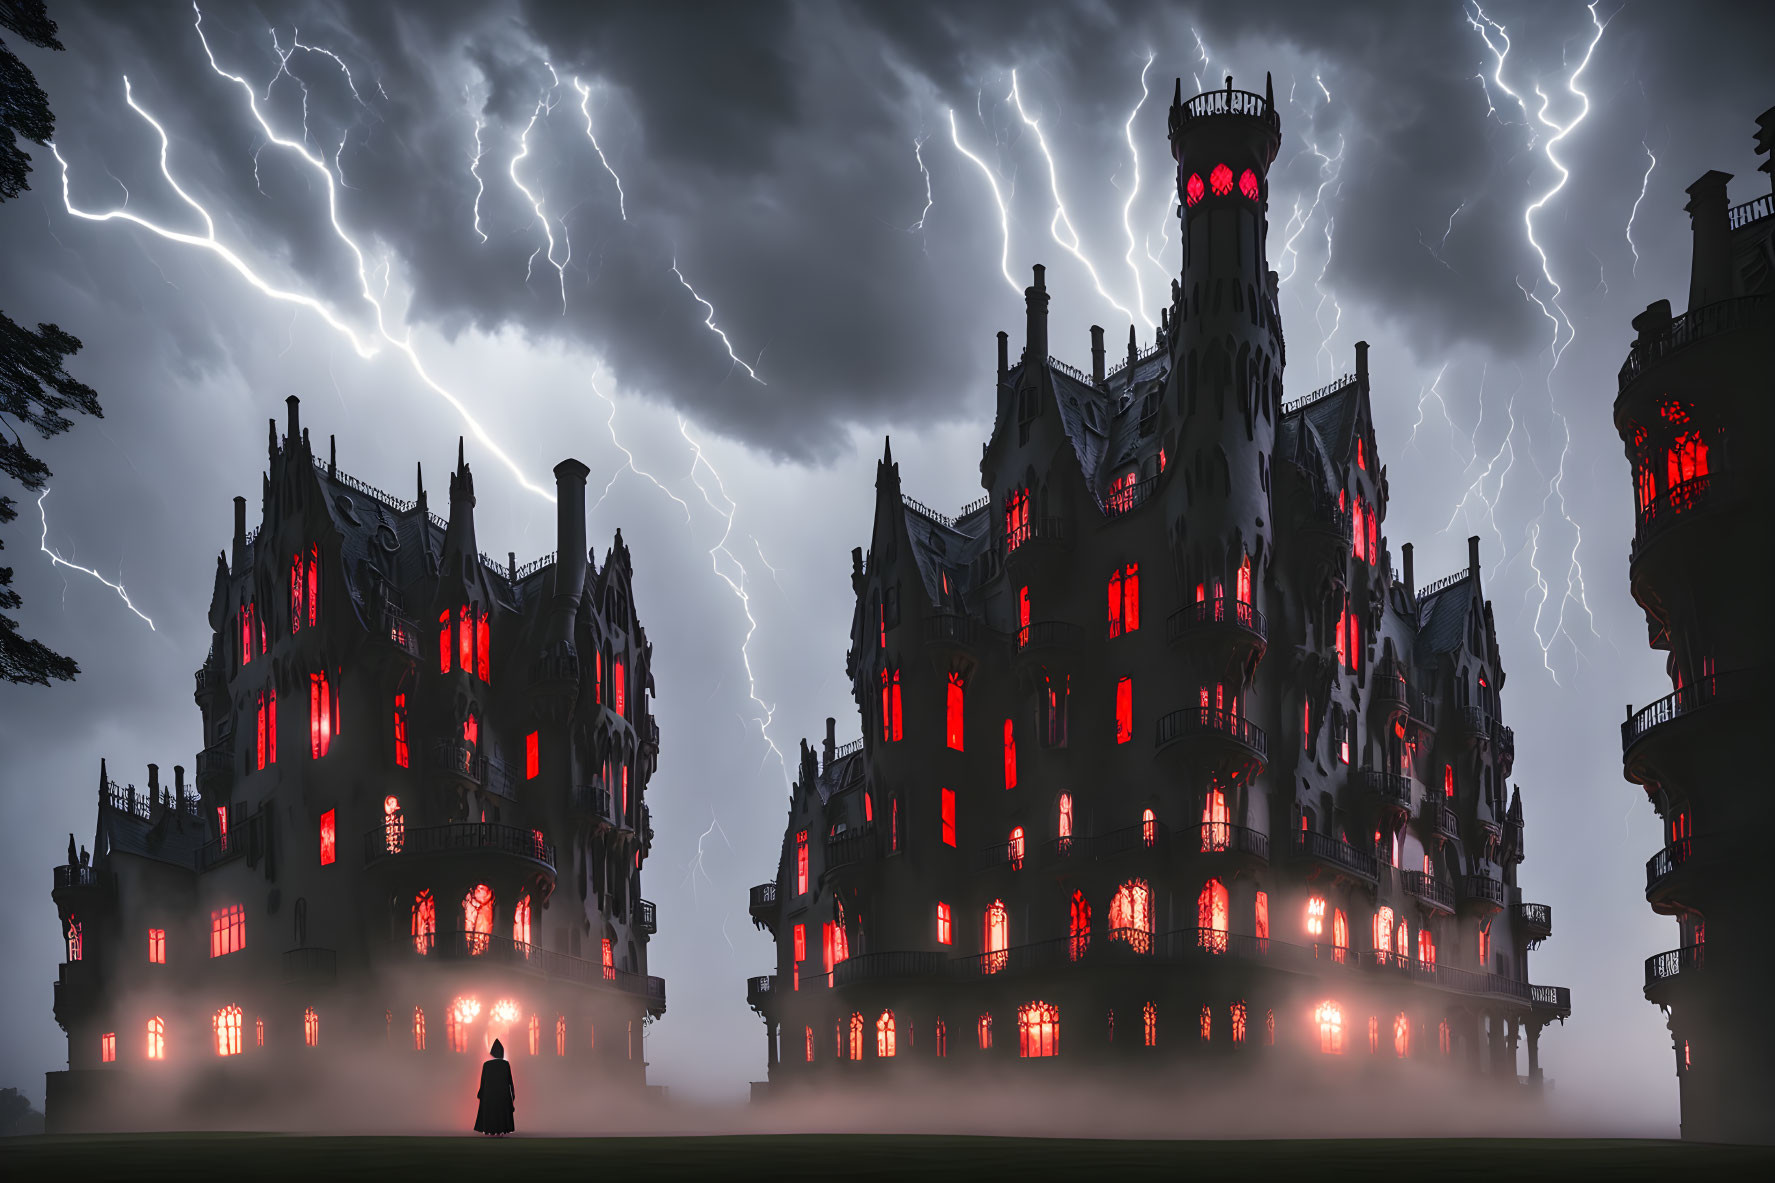 Gothic-style castle with red lights, lightning strikes, and lone figure in stormy sky